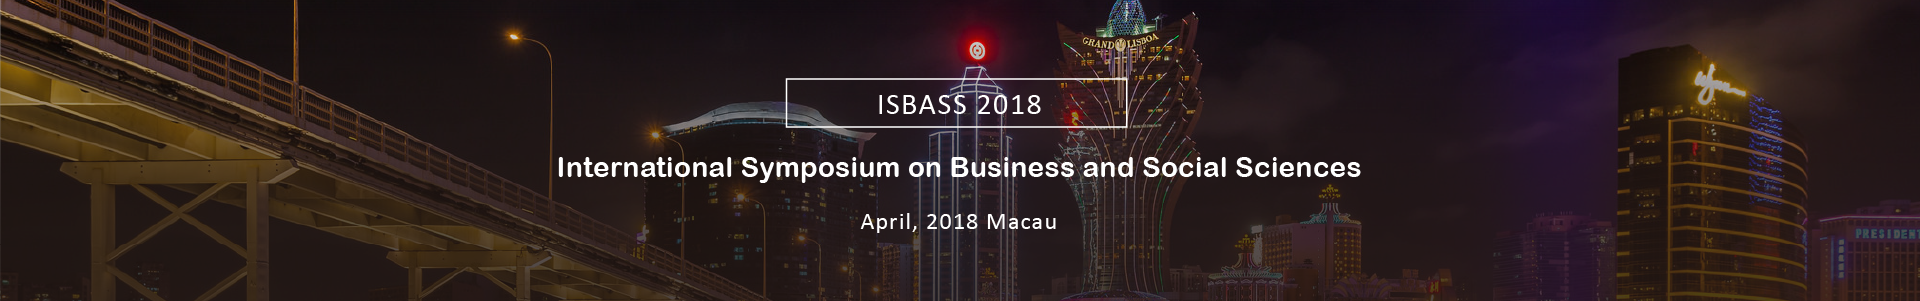 
For more information, please visit: http://www.isbass.org
or contact: isbass@isbass.org